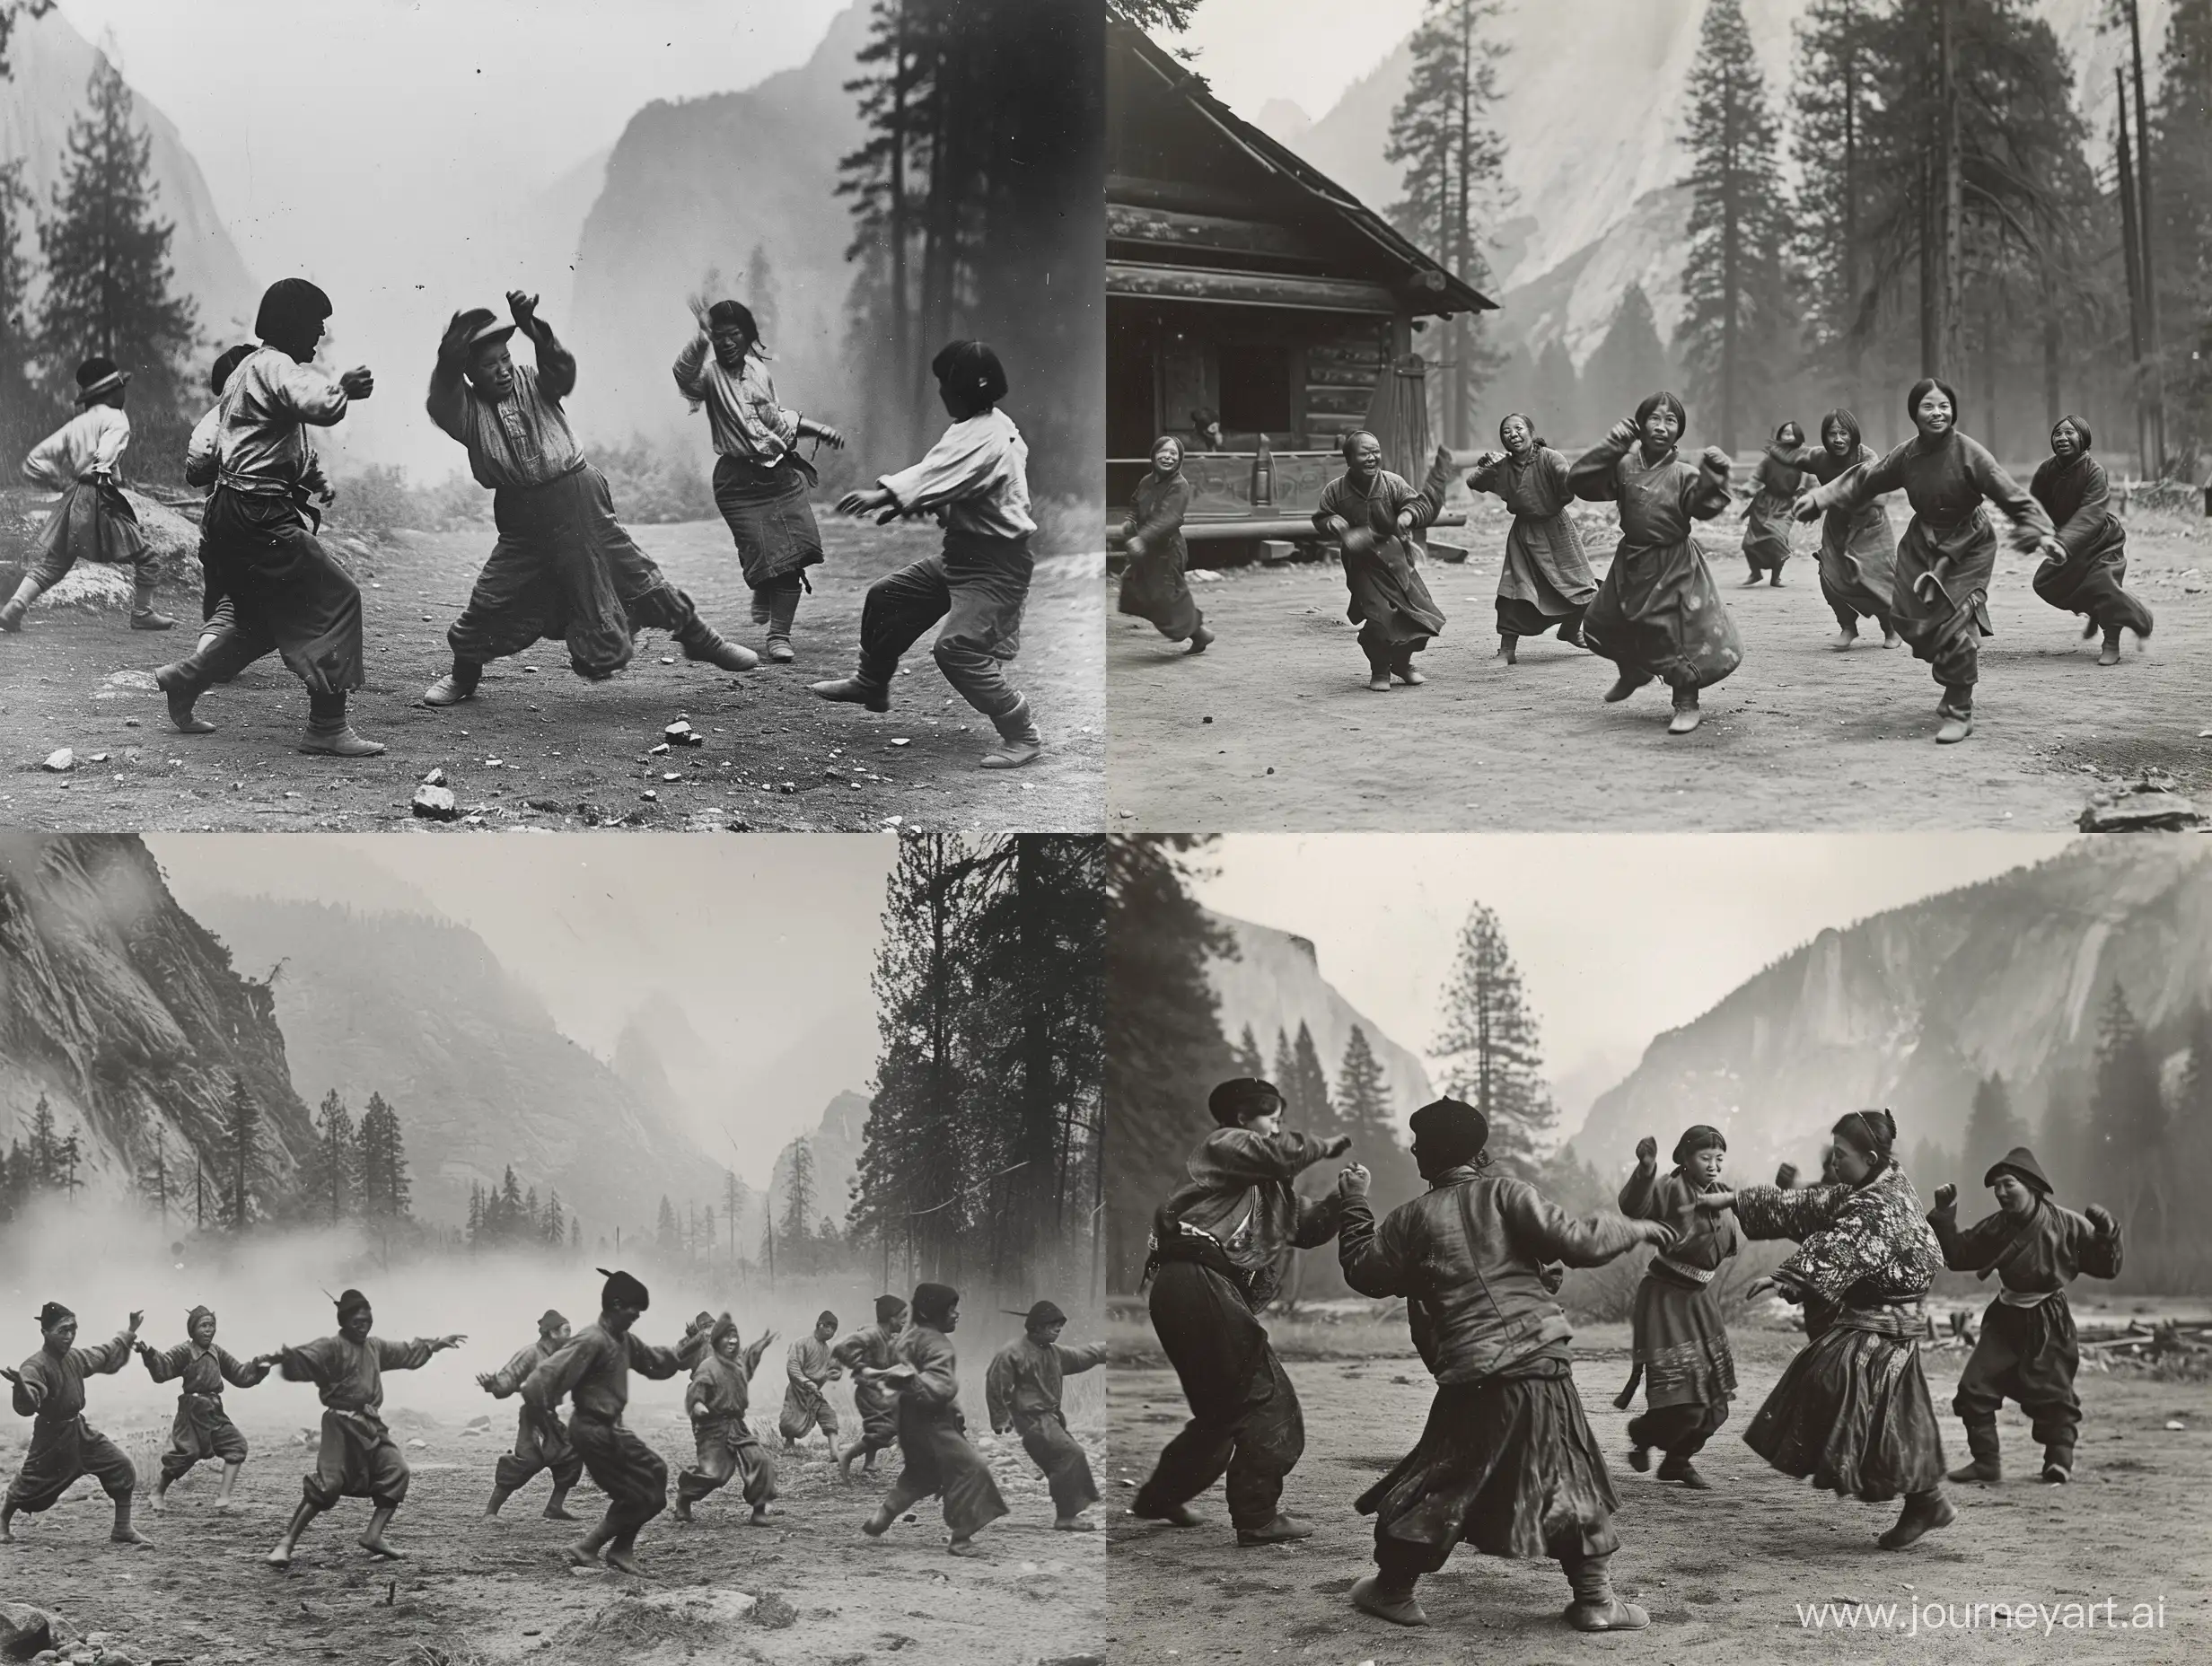 Chinese-Workers-Dancing-at-Yosemite-in-Late-1800s